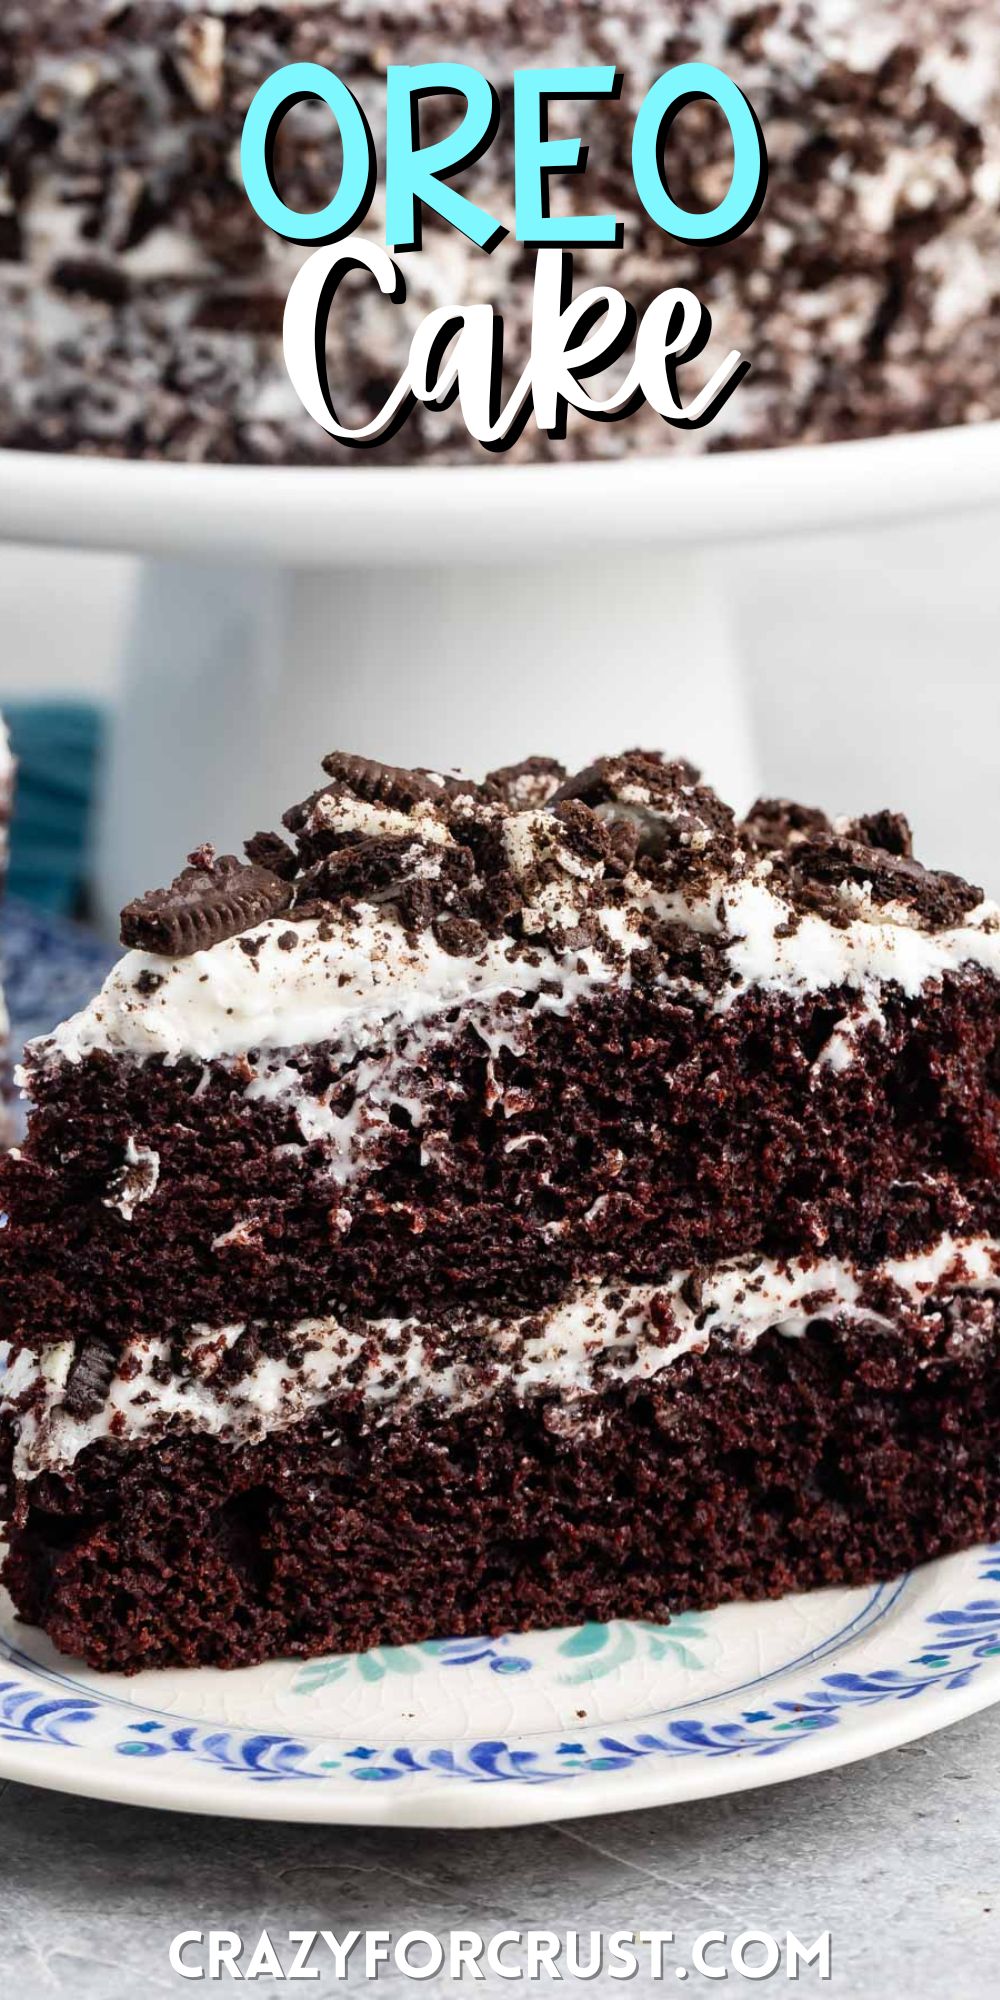 brown layered cake with white frosting and crushed oreos on top with words on the image.